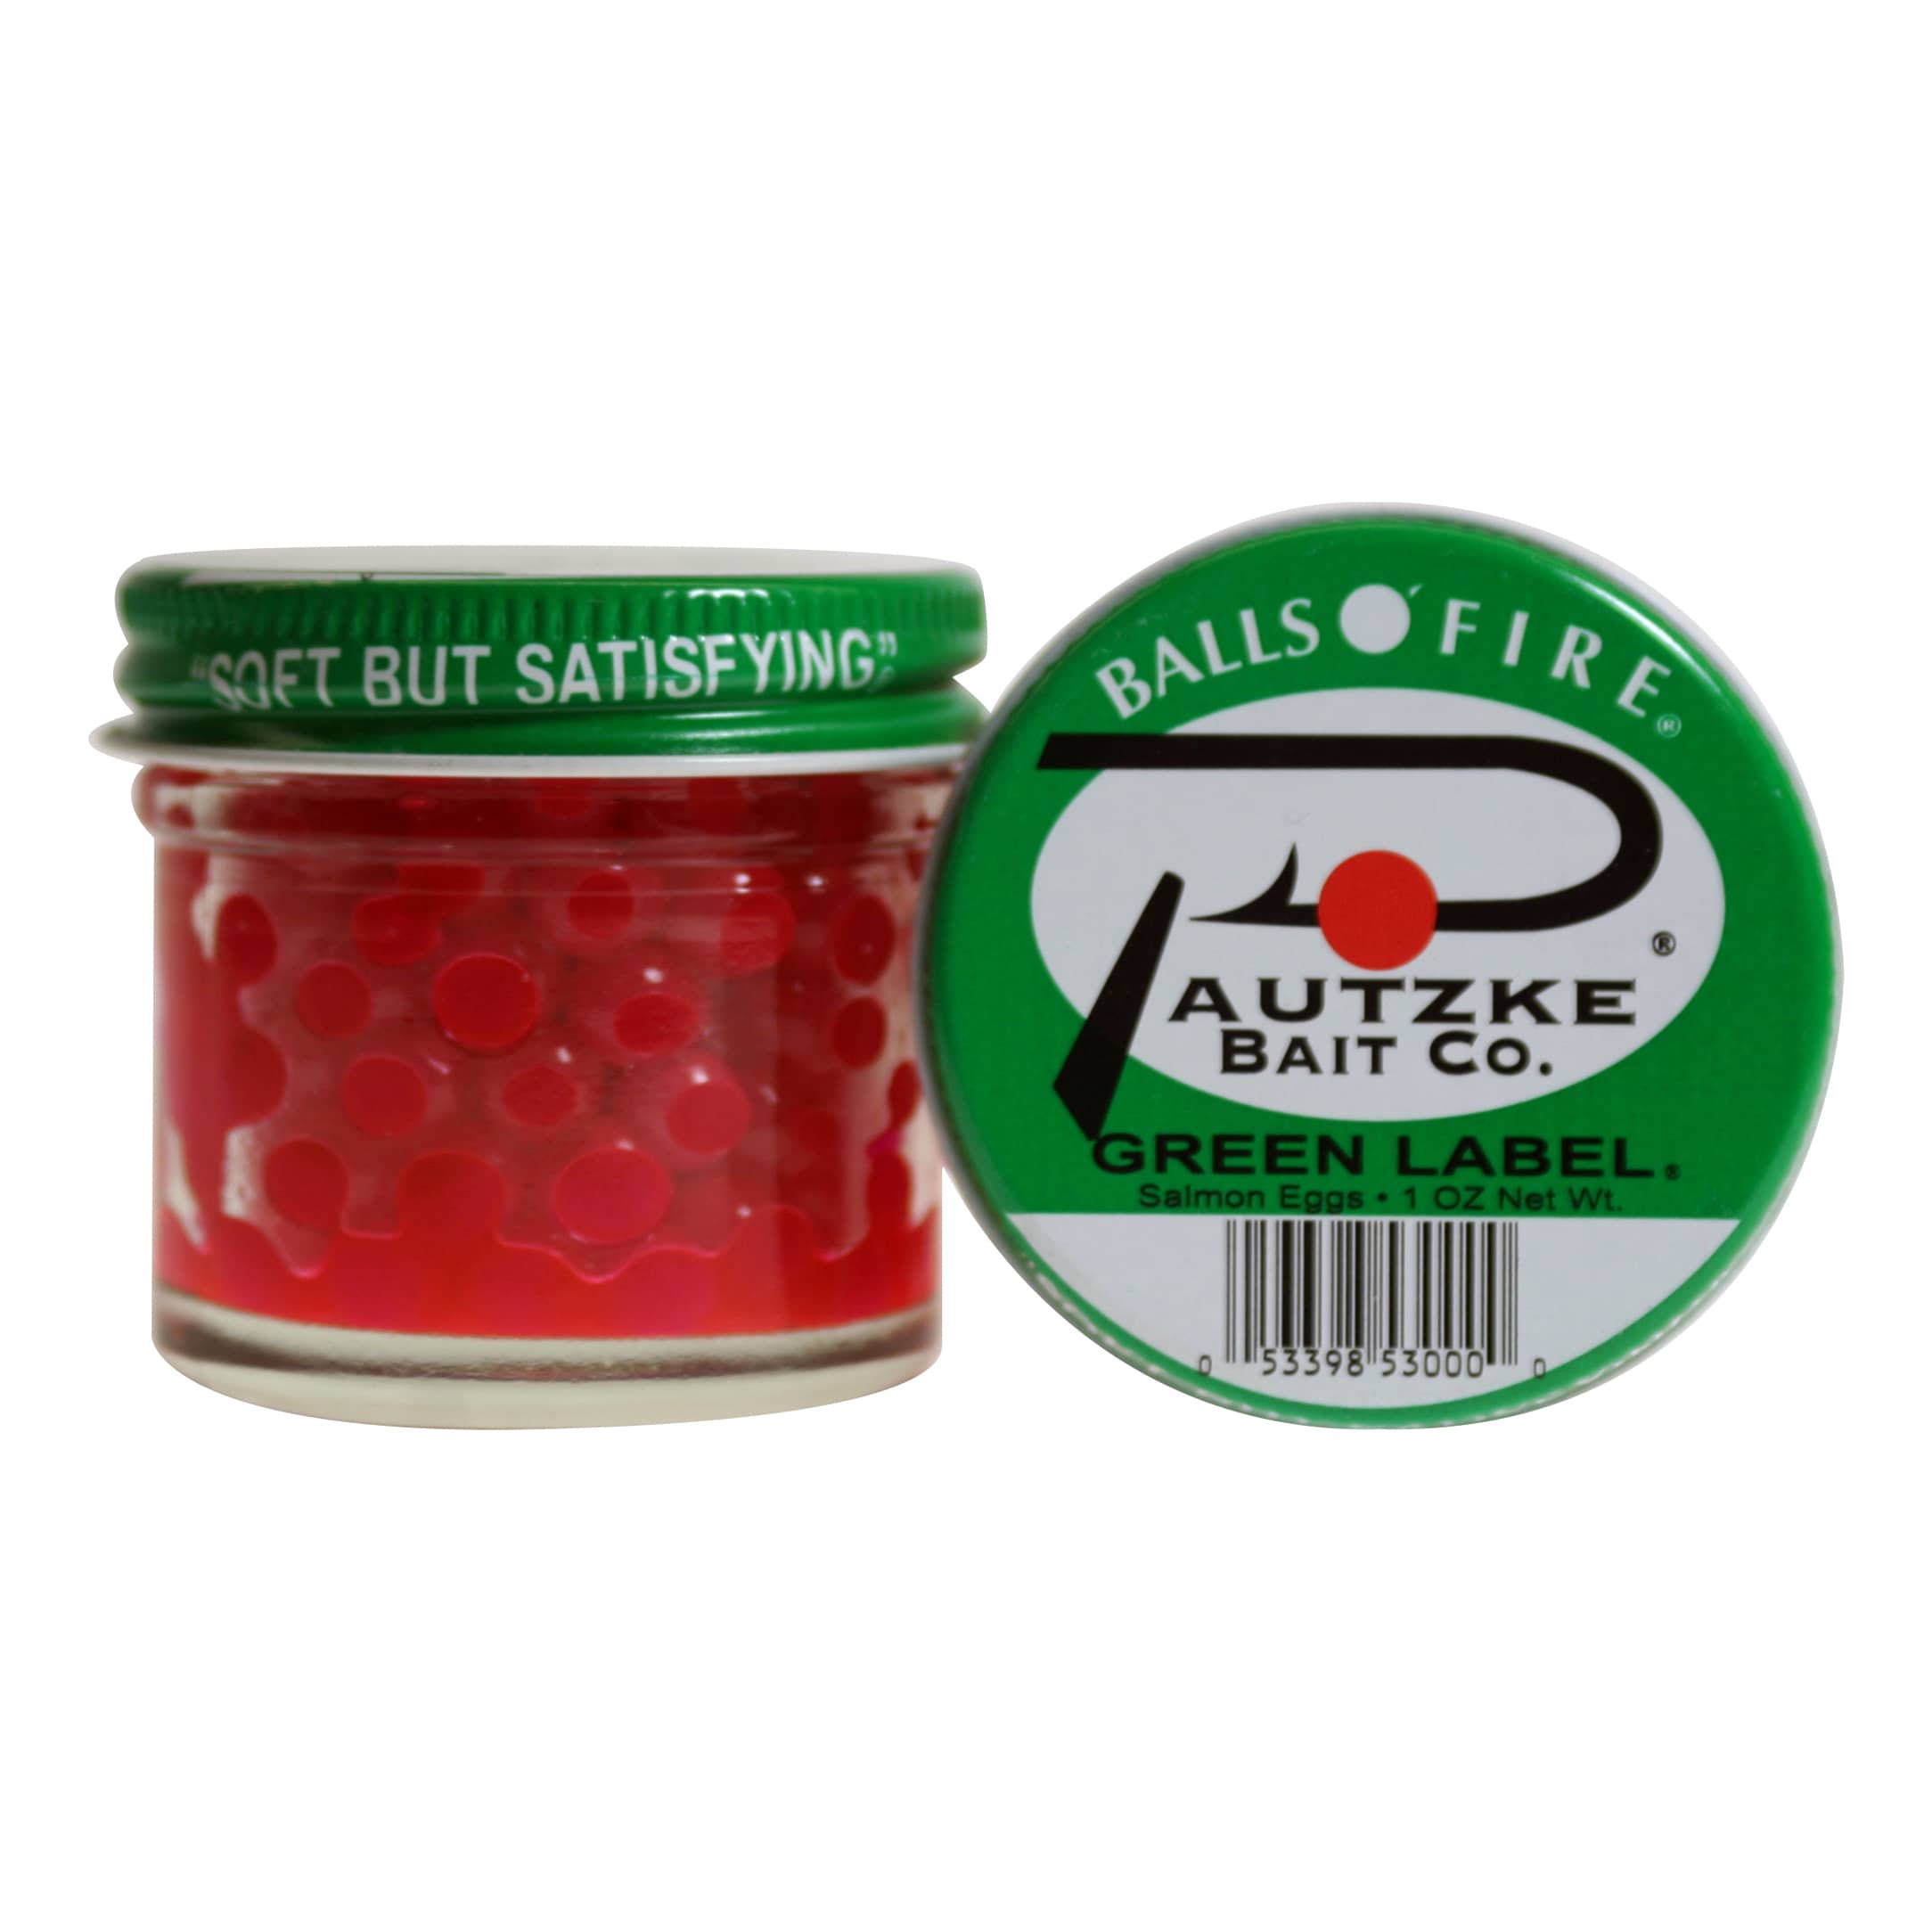 PAUTZKE BAIT CO. NATURAL DELUXE SALMON EGGS 1.5OZ – Bullets and Broadheads